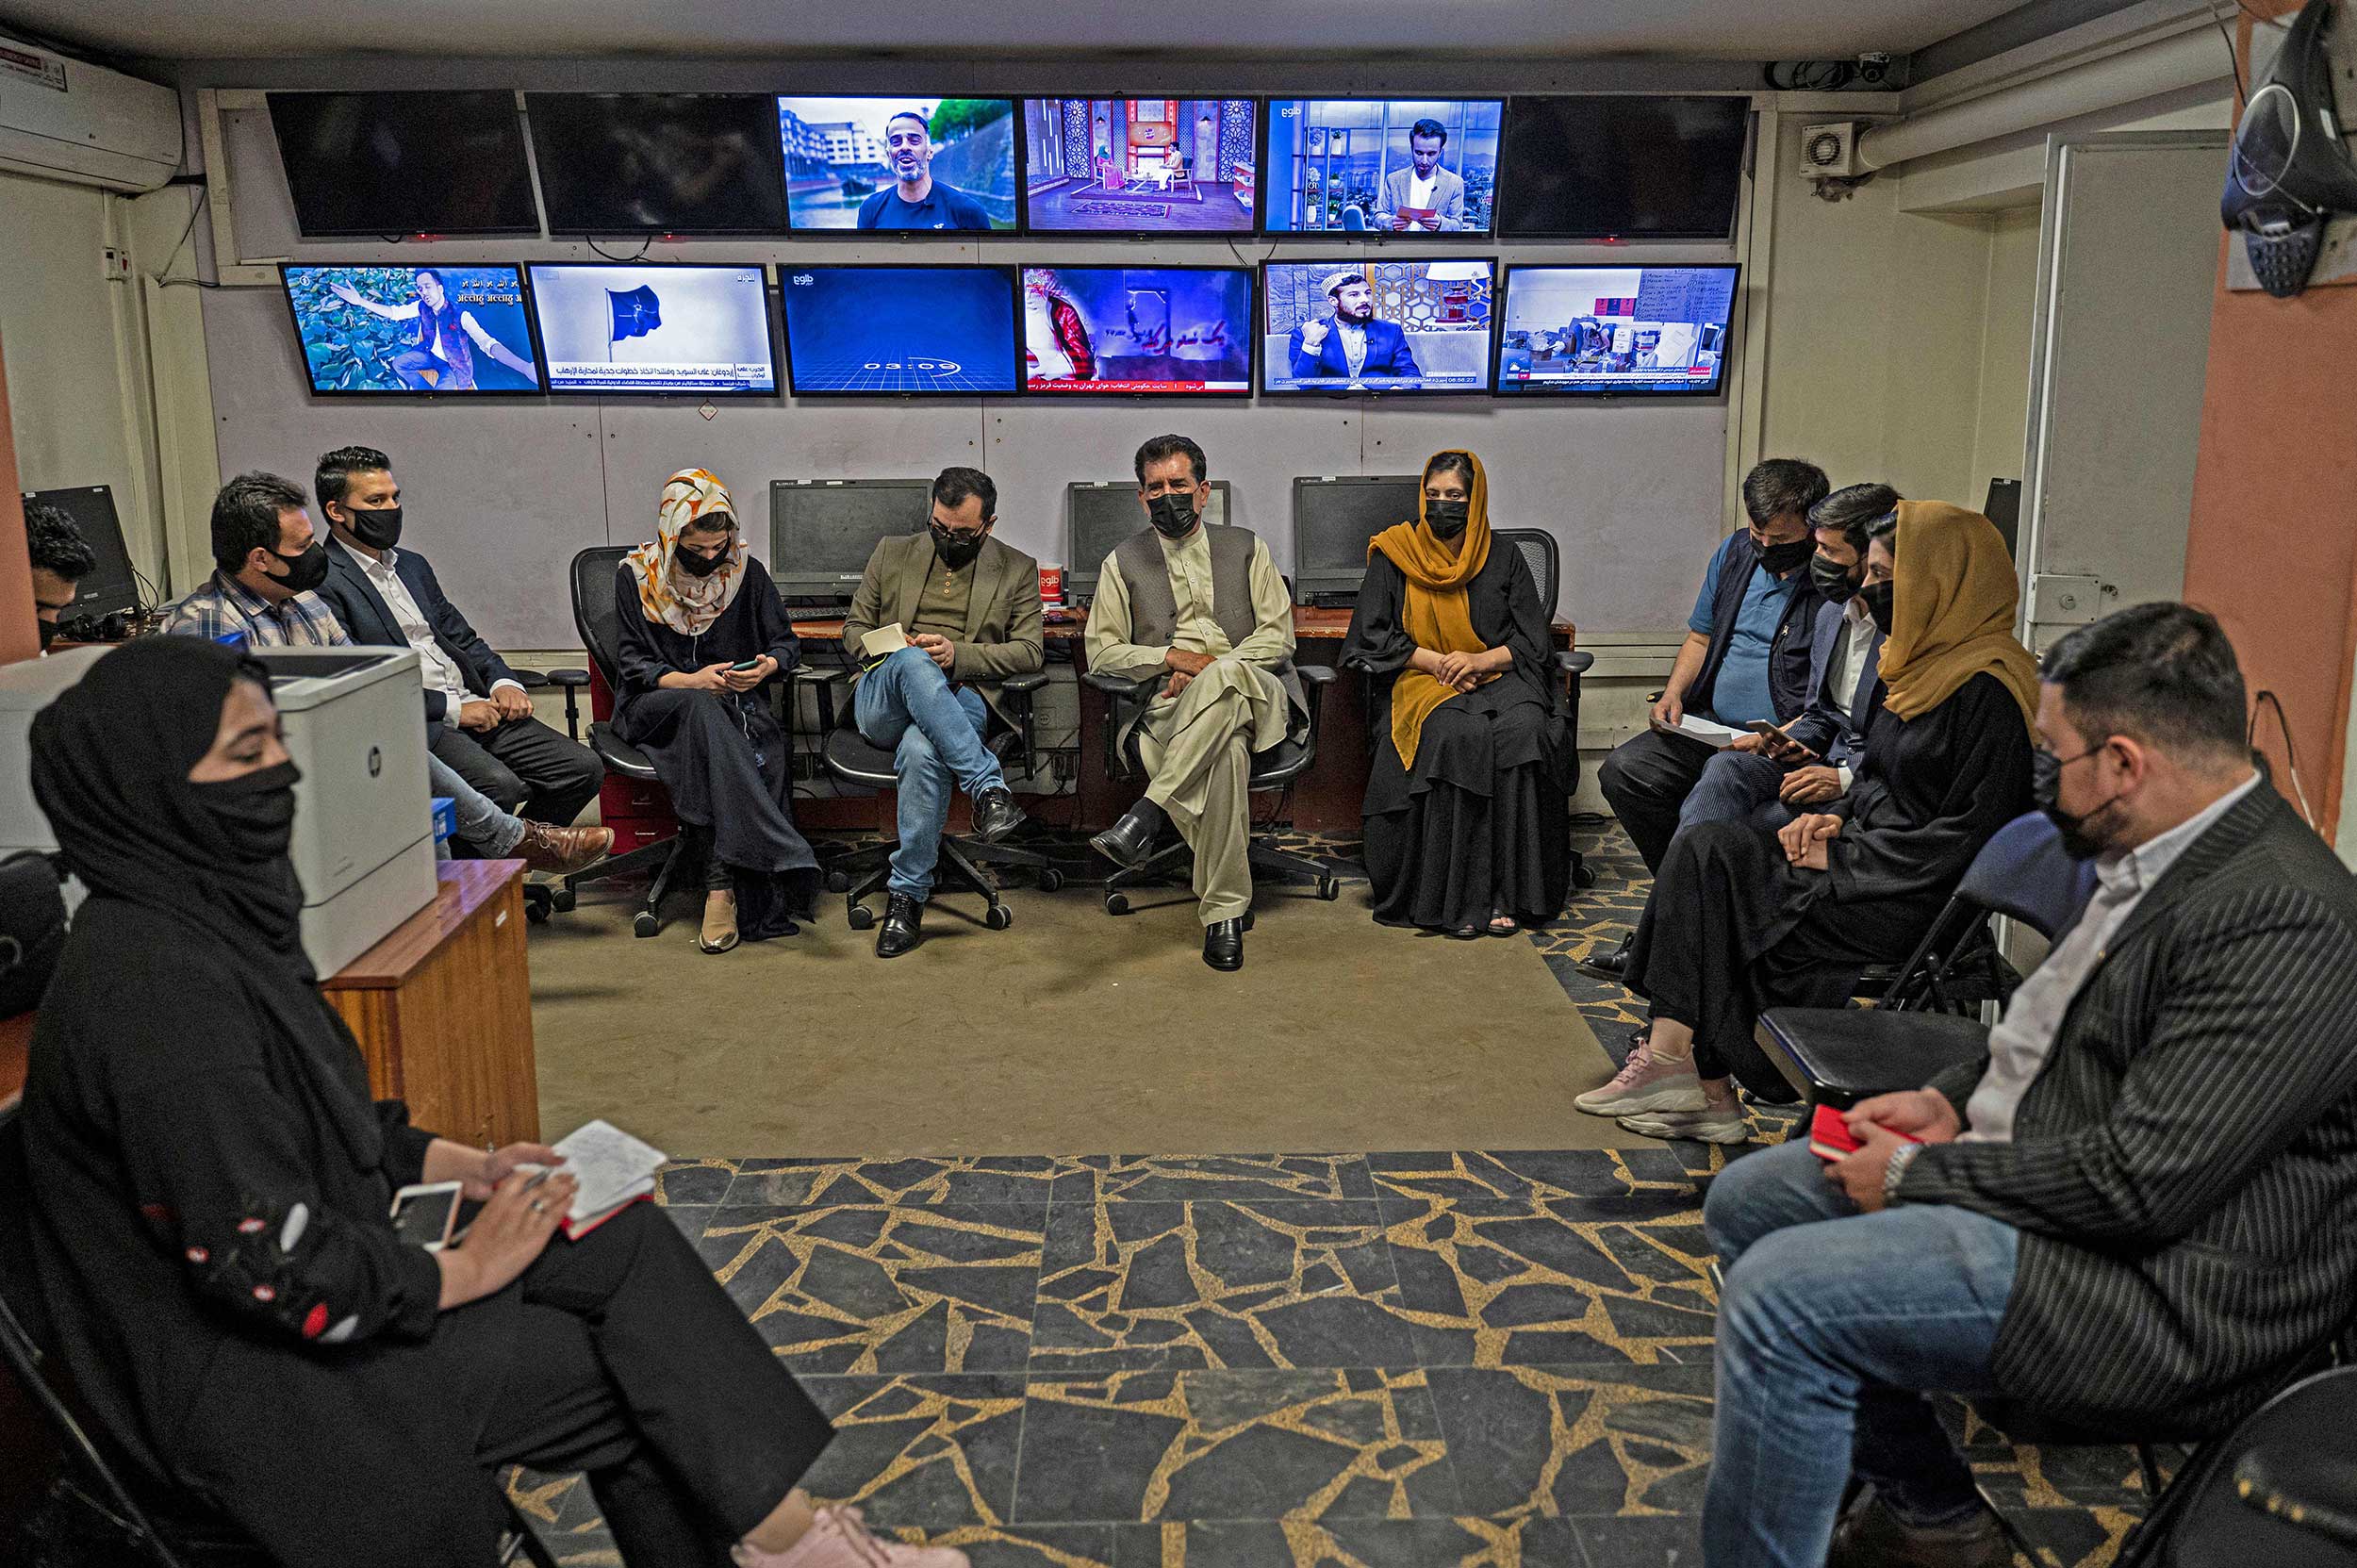 Reporters for Tolo News cover their faces as they attend an editorial meeting at Tolo TV station in Kabul on May 22, 2022. © WAKIL KOHSAR/AFP via Getty Images